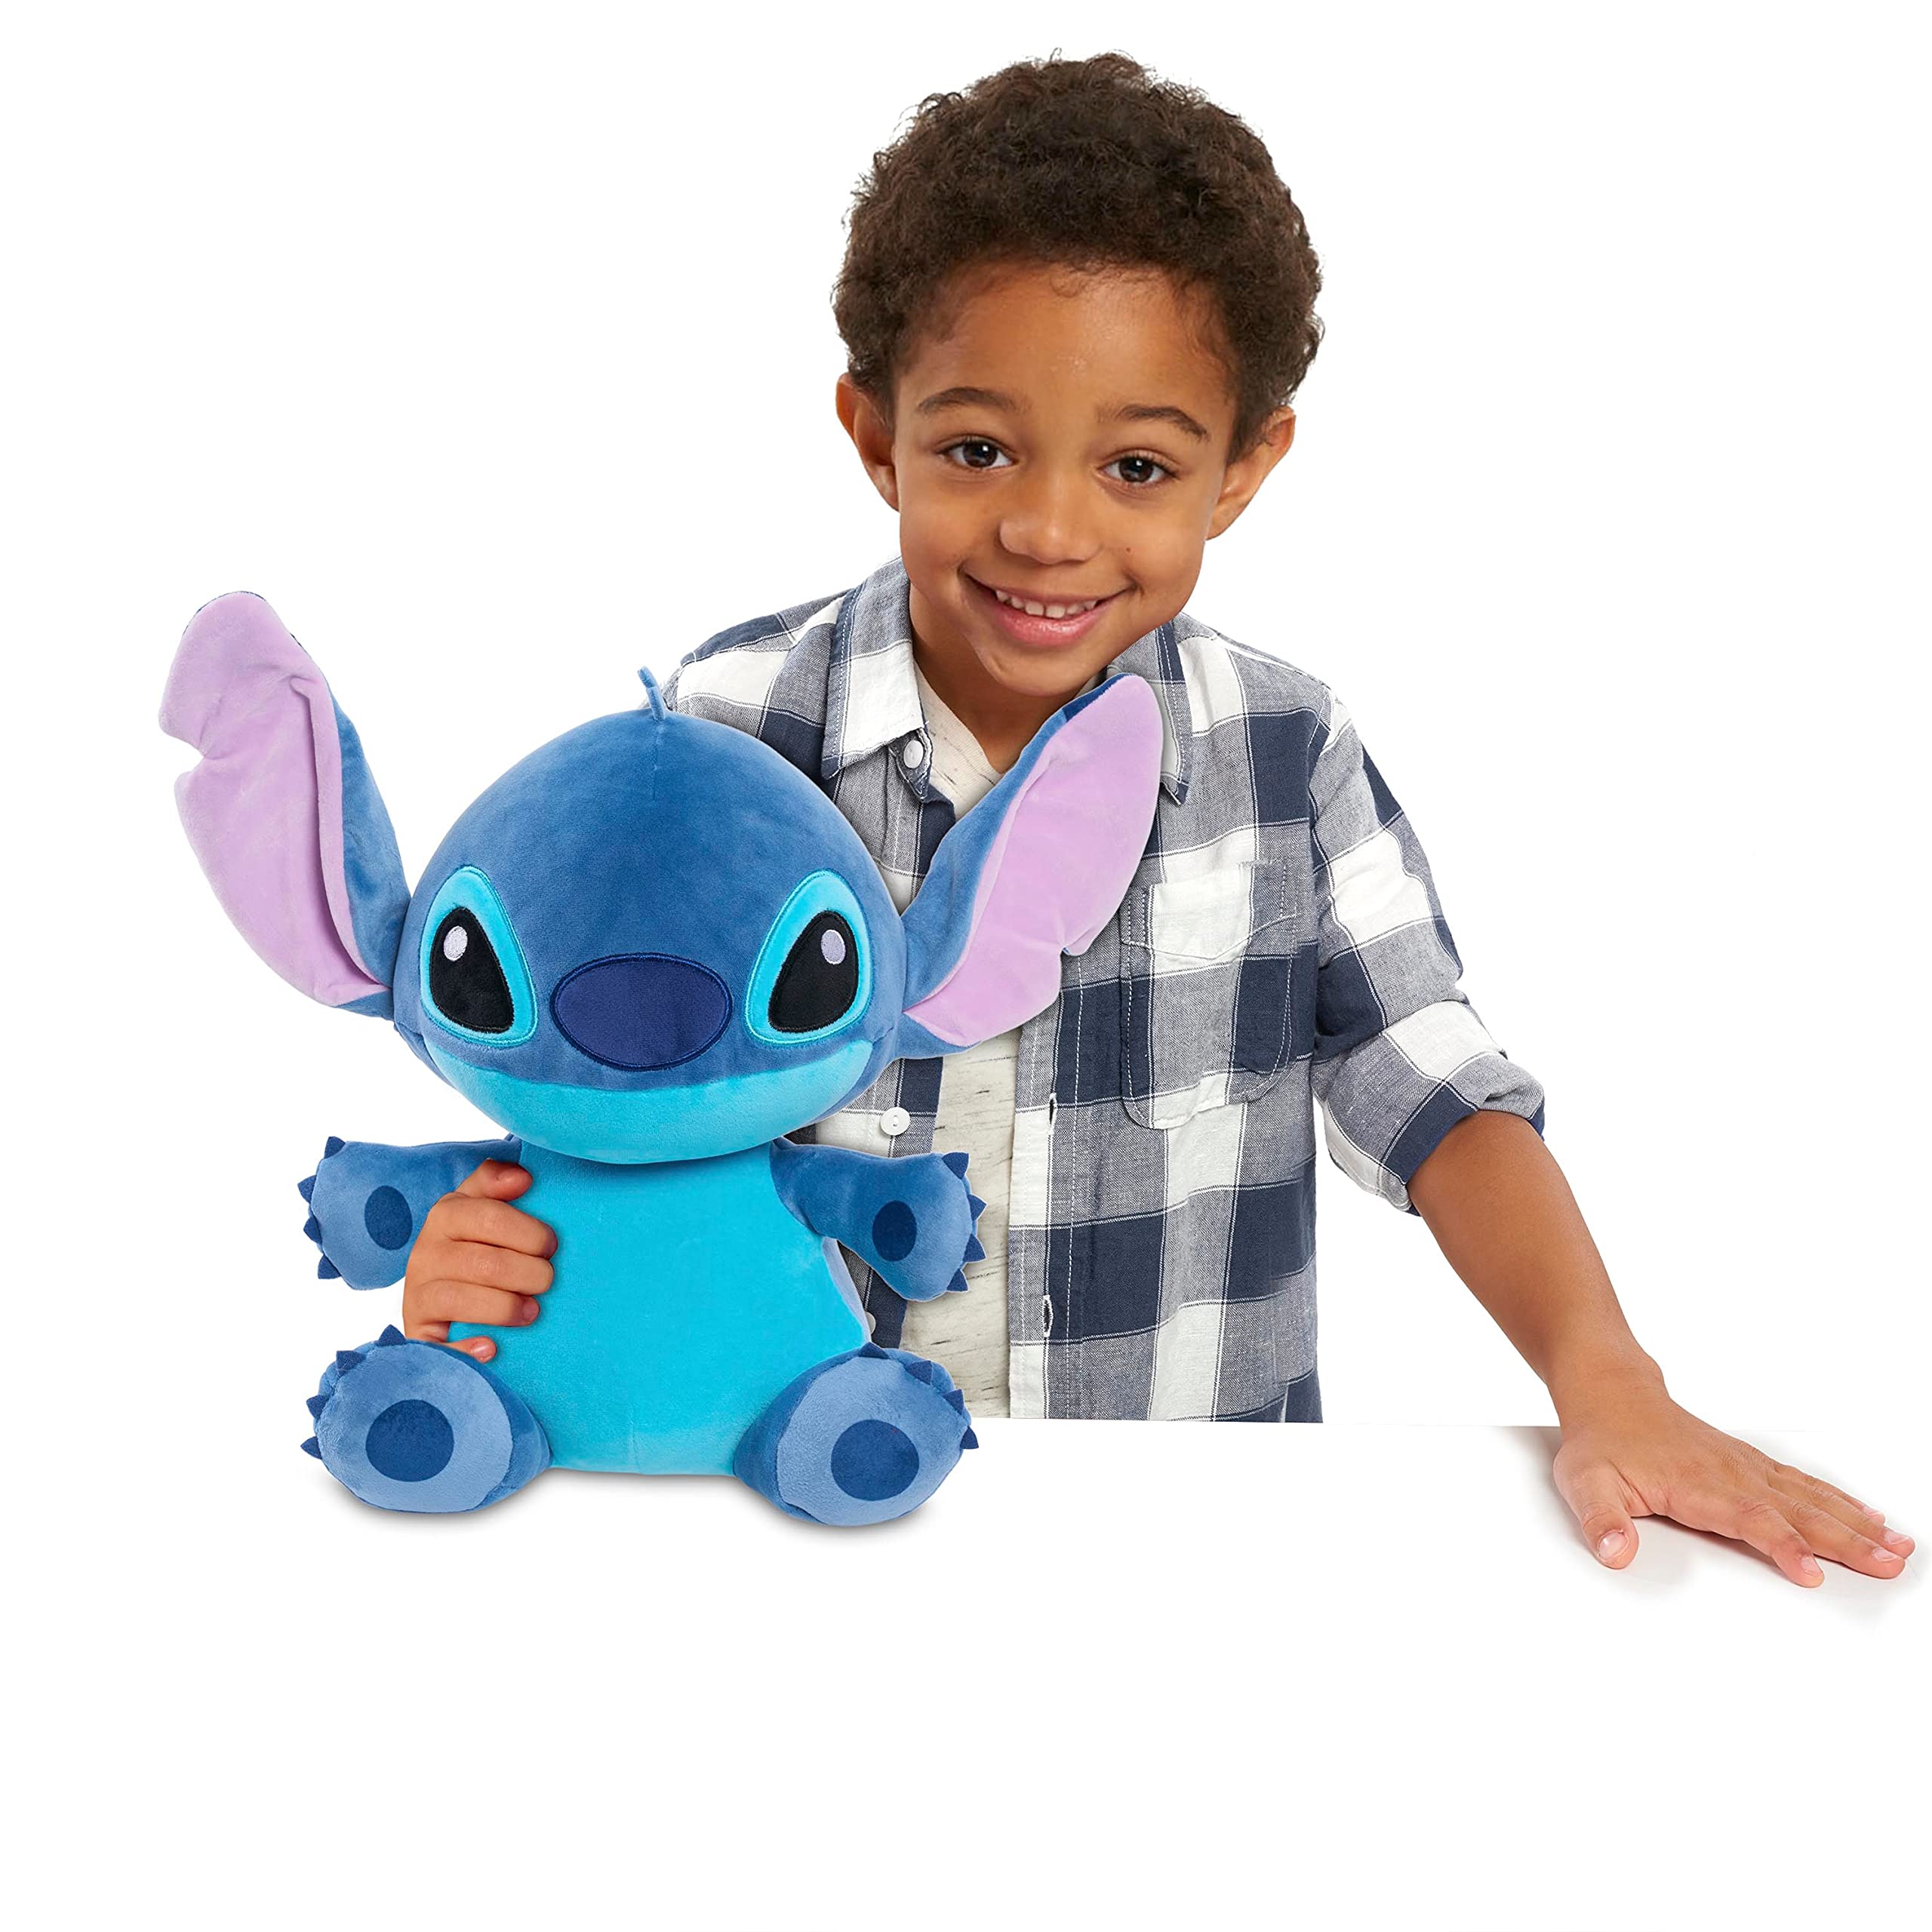 Disney Classics 14-inch Stitch, Comfort Weighted Plush, Officially Licensed Kids Toys for Ages 3 Up, Gifts and Presents by Just Play